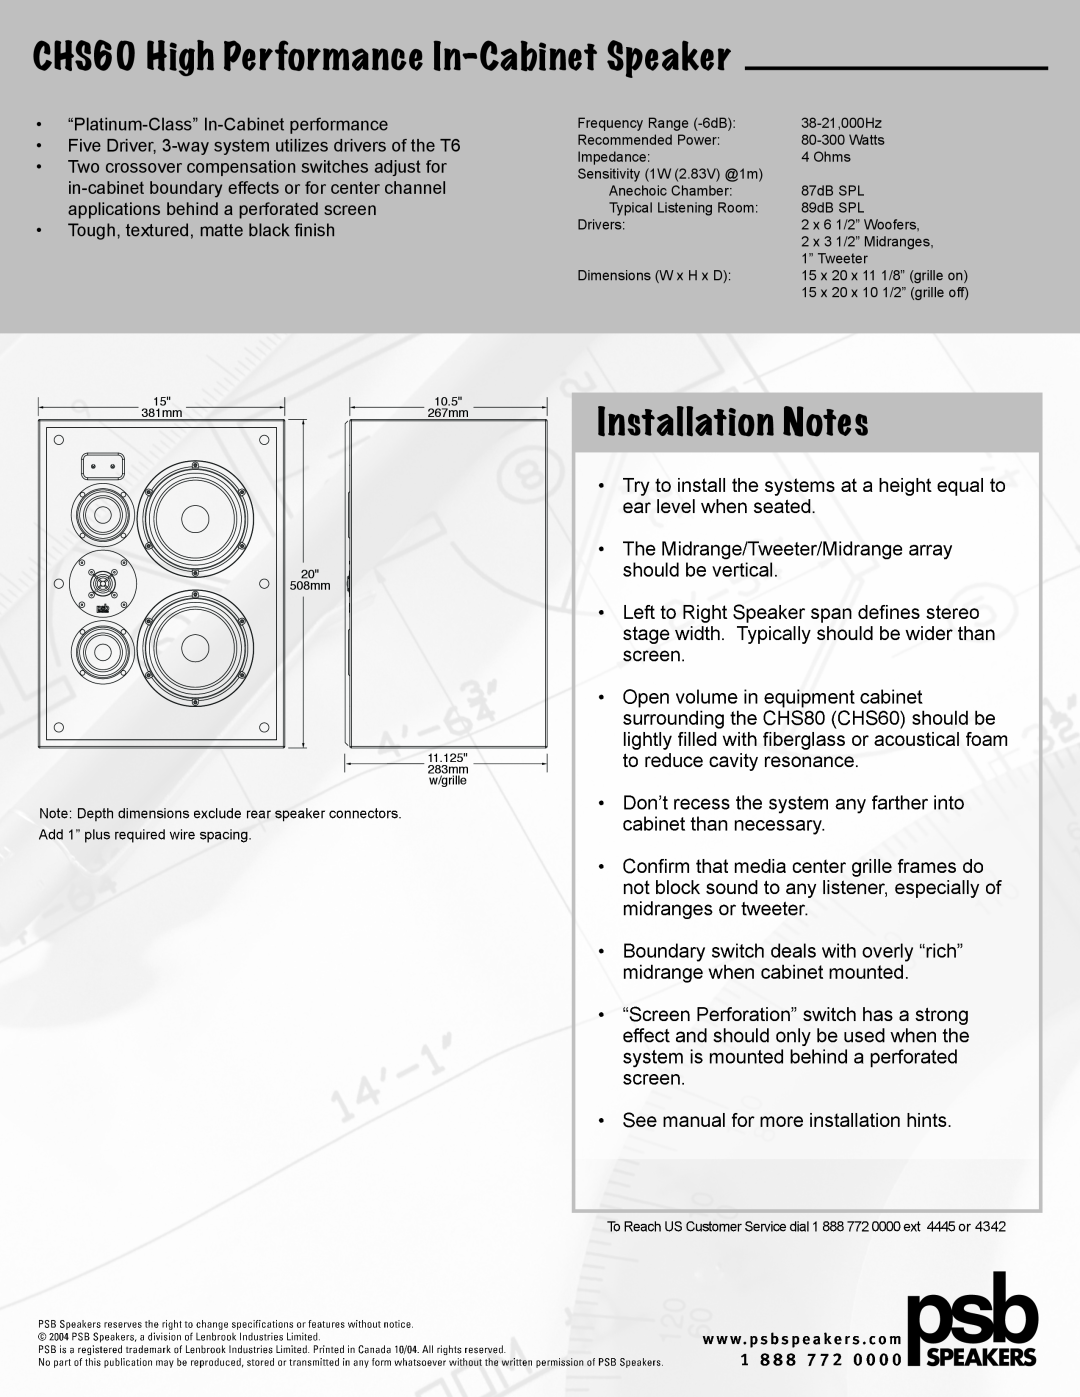 PSB Speakers manual CHS60 High Performance In-Cabinet Speaker, Installation Notes 